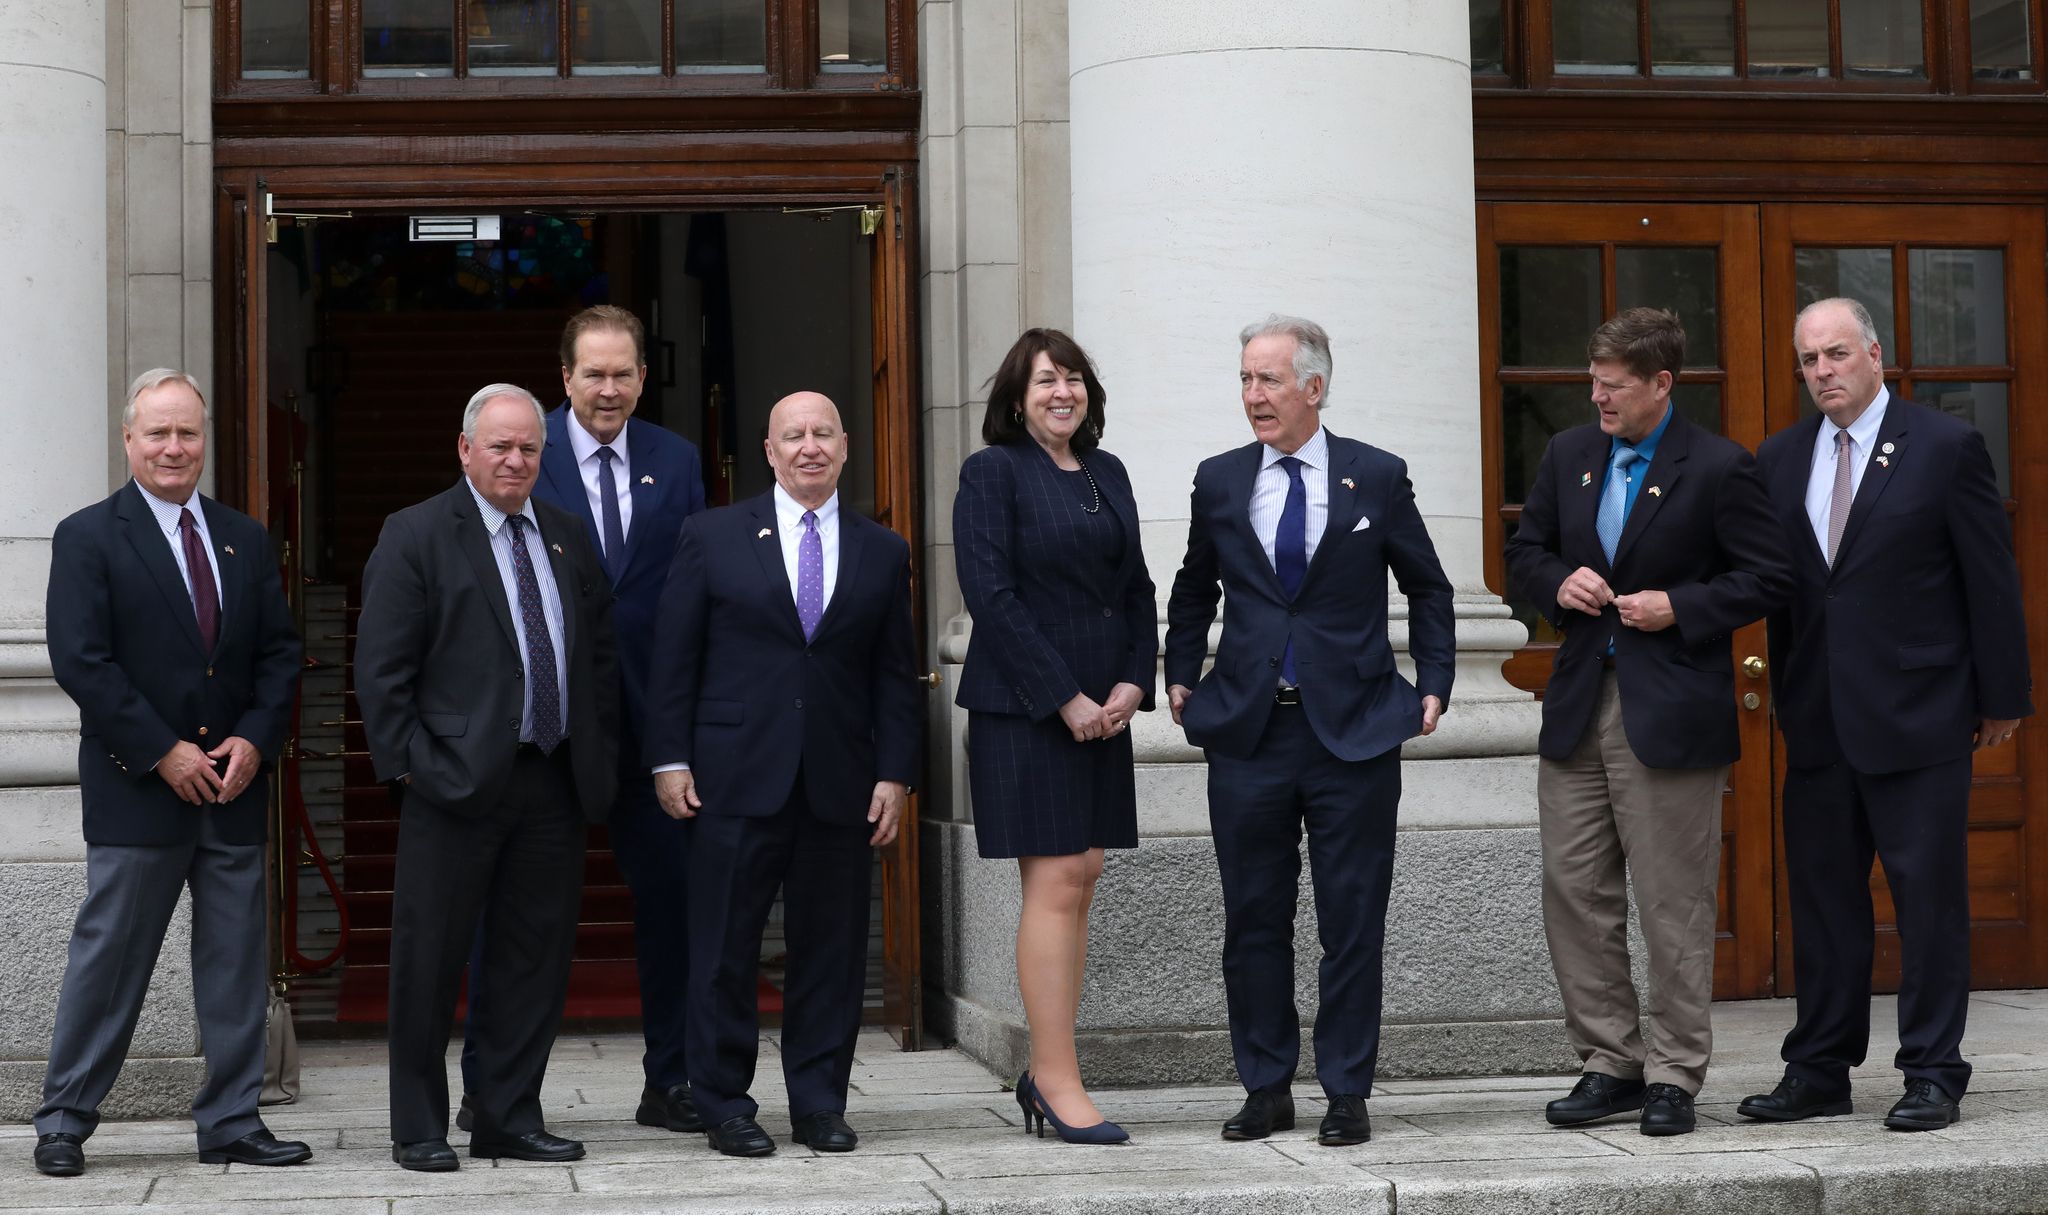 VISIT: Senator Richie Neal, third right, leads the delegation from the US on their visit to Ireland